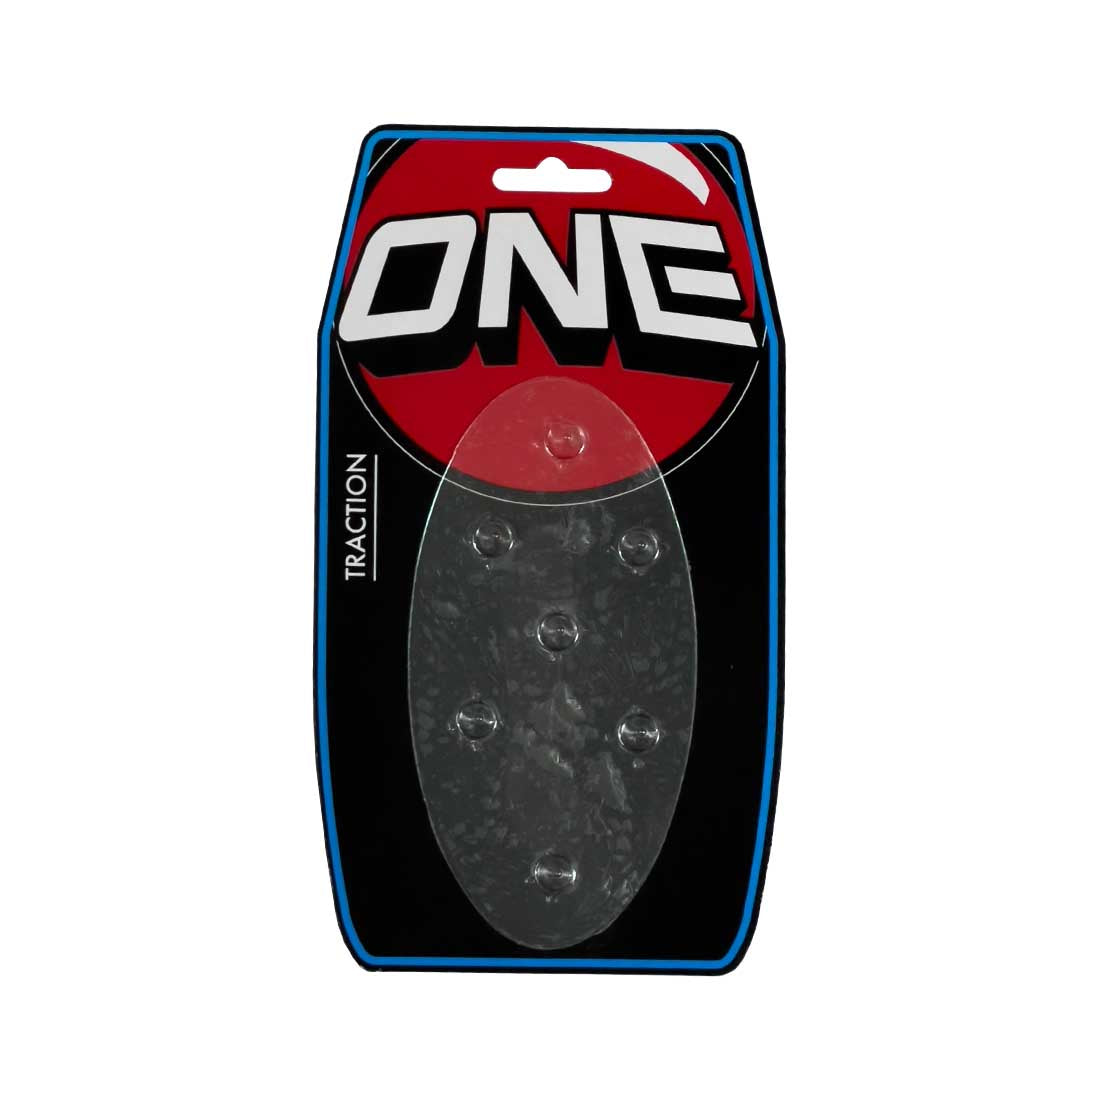 Crystal Clear Oval Snowboard Stomp Pad